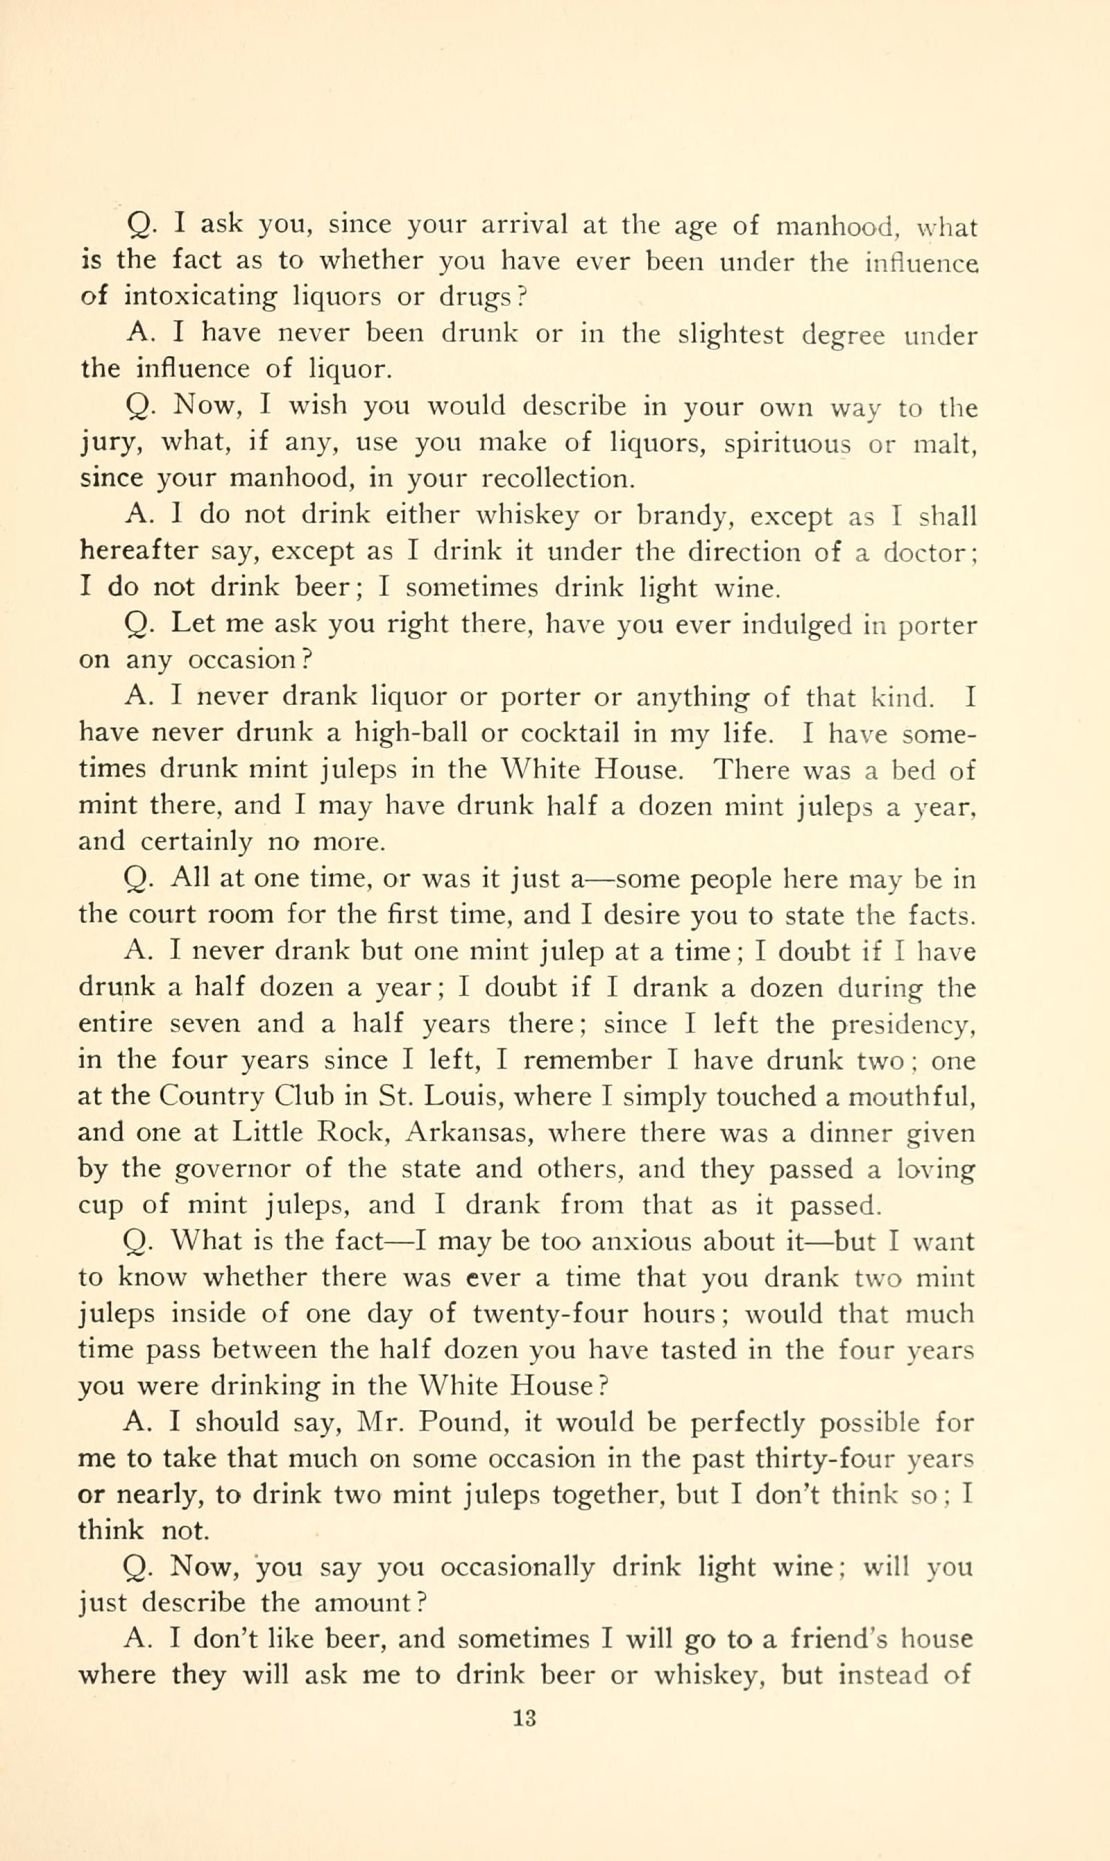 Testimony concerning Roosevelt's personal habits in the trial of his libel suit against the newspaper’s publisher.